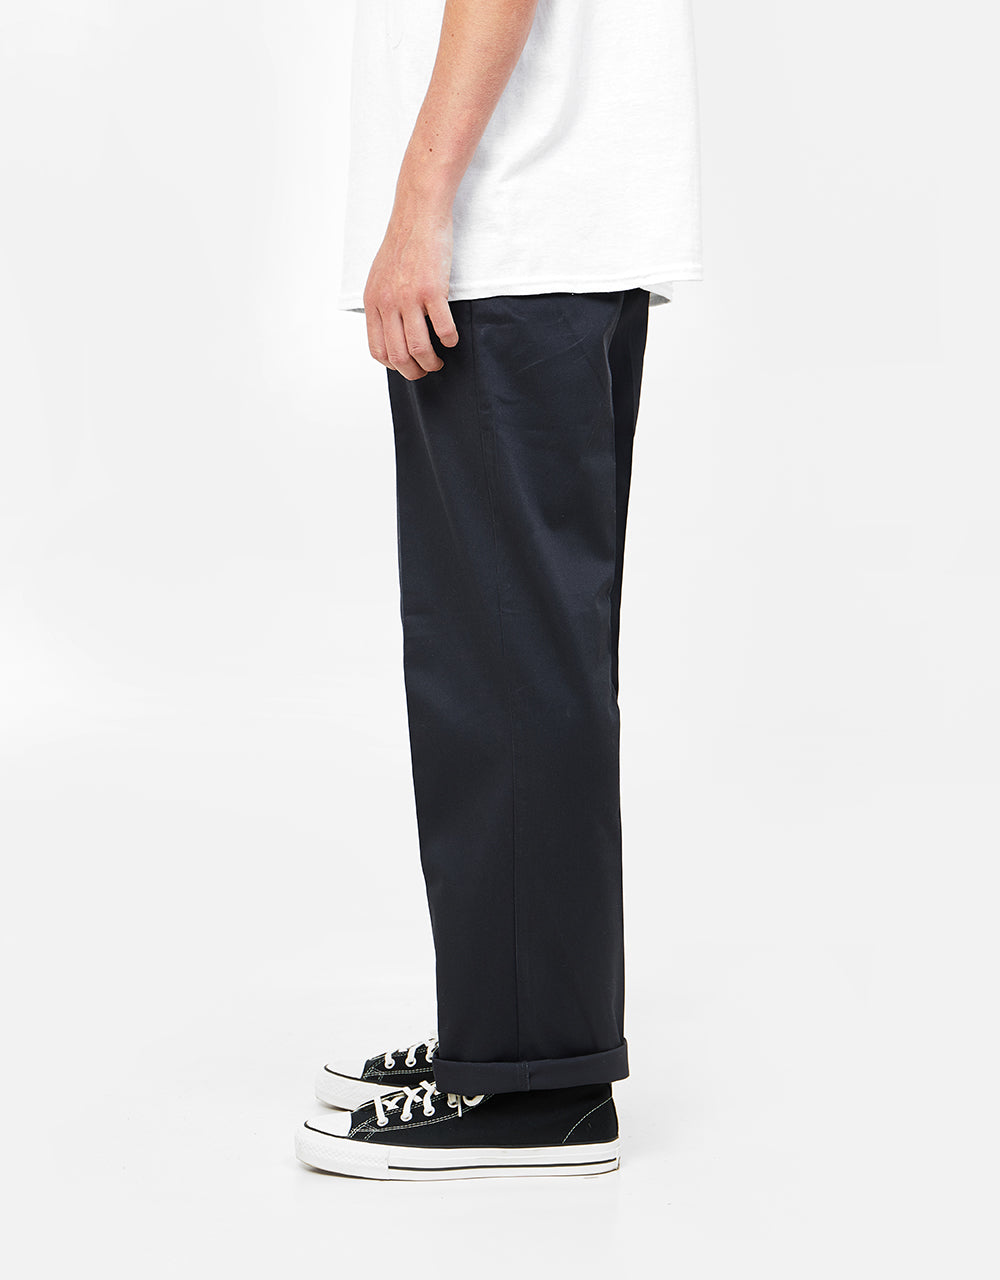 Route One Workpant - Charcoal